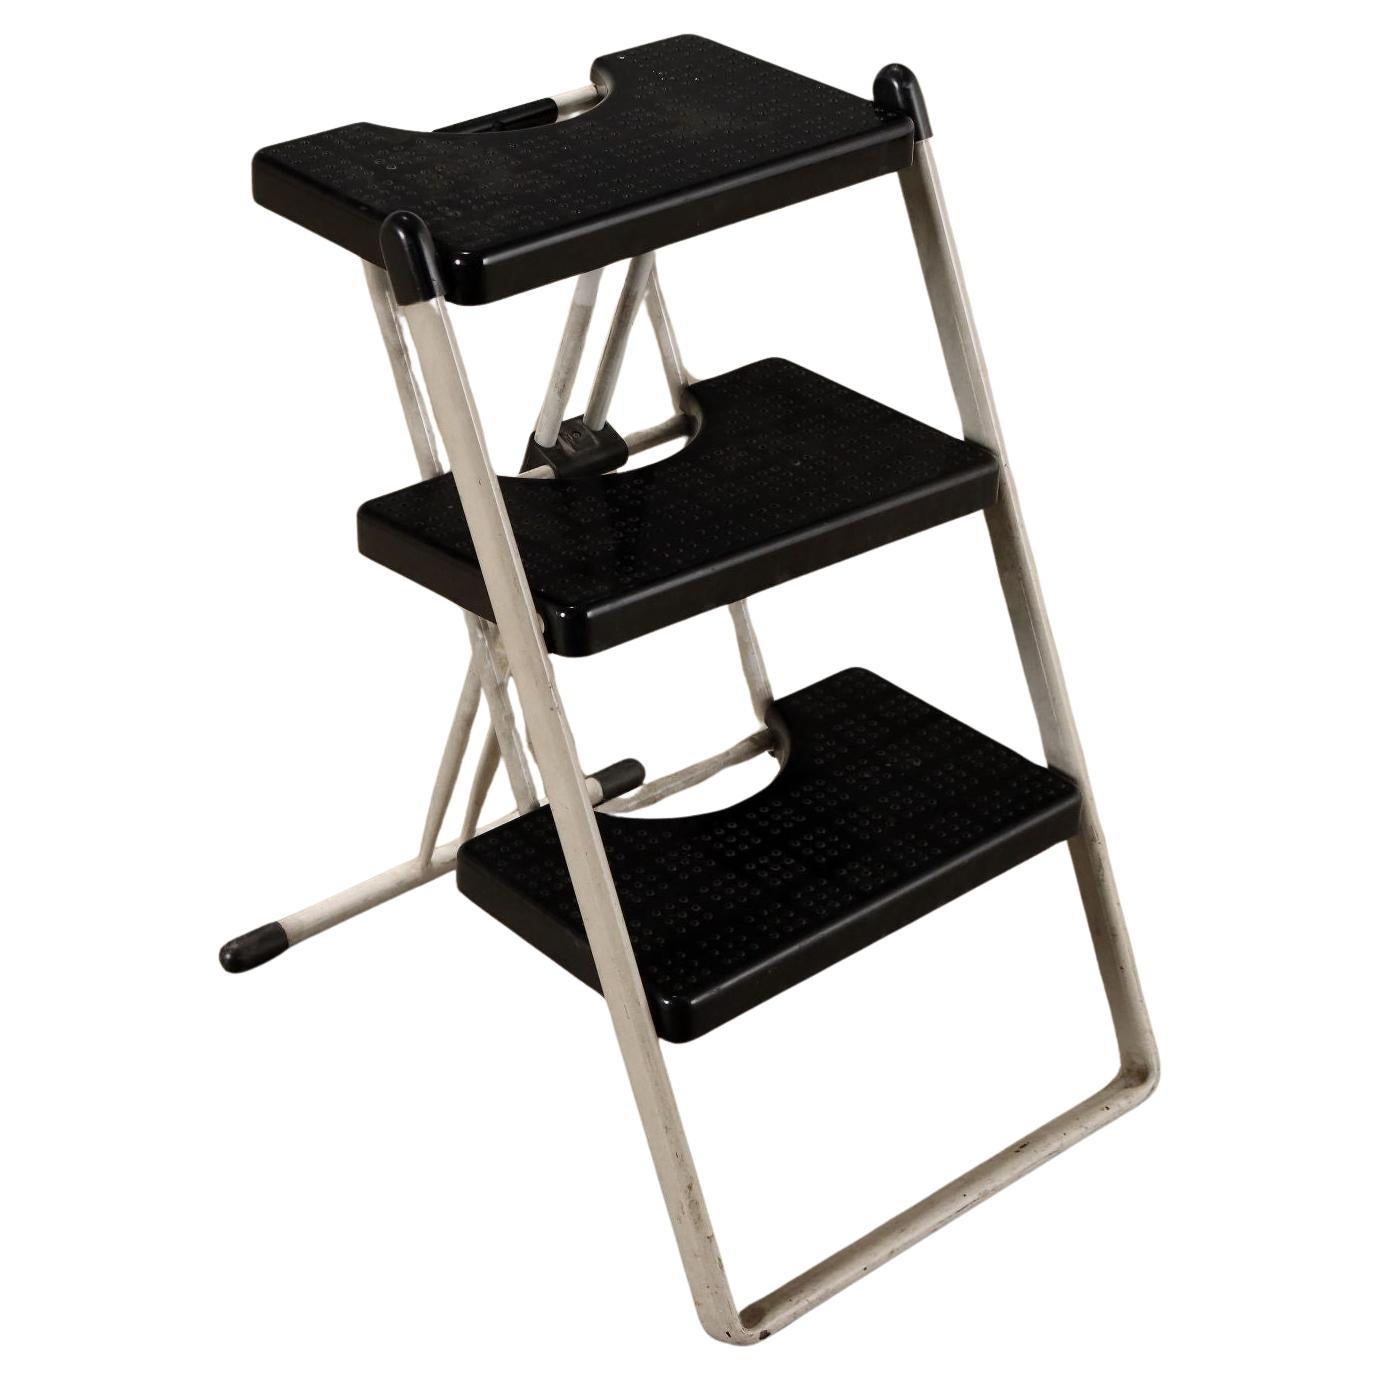 Step ladder by Andries Onck for Magis Anni 80s